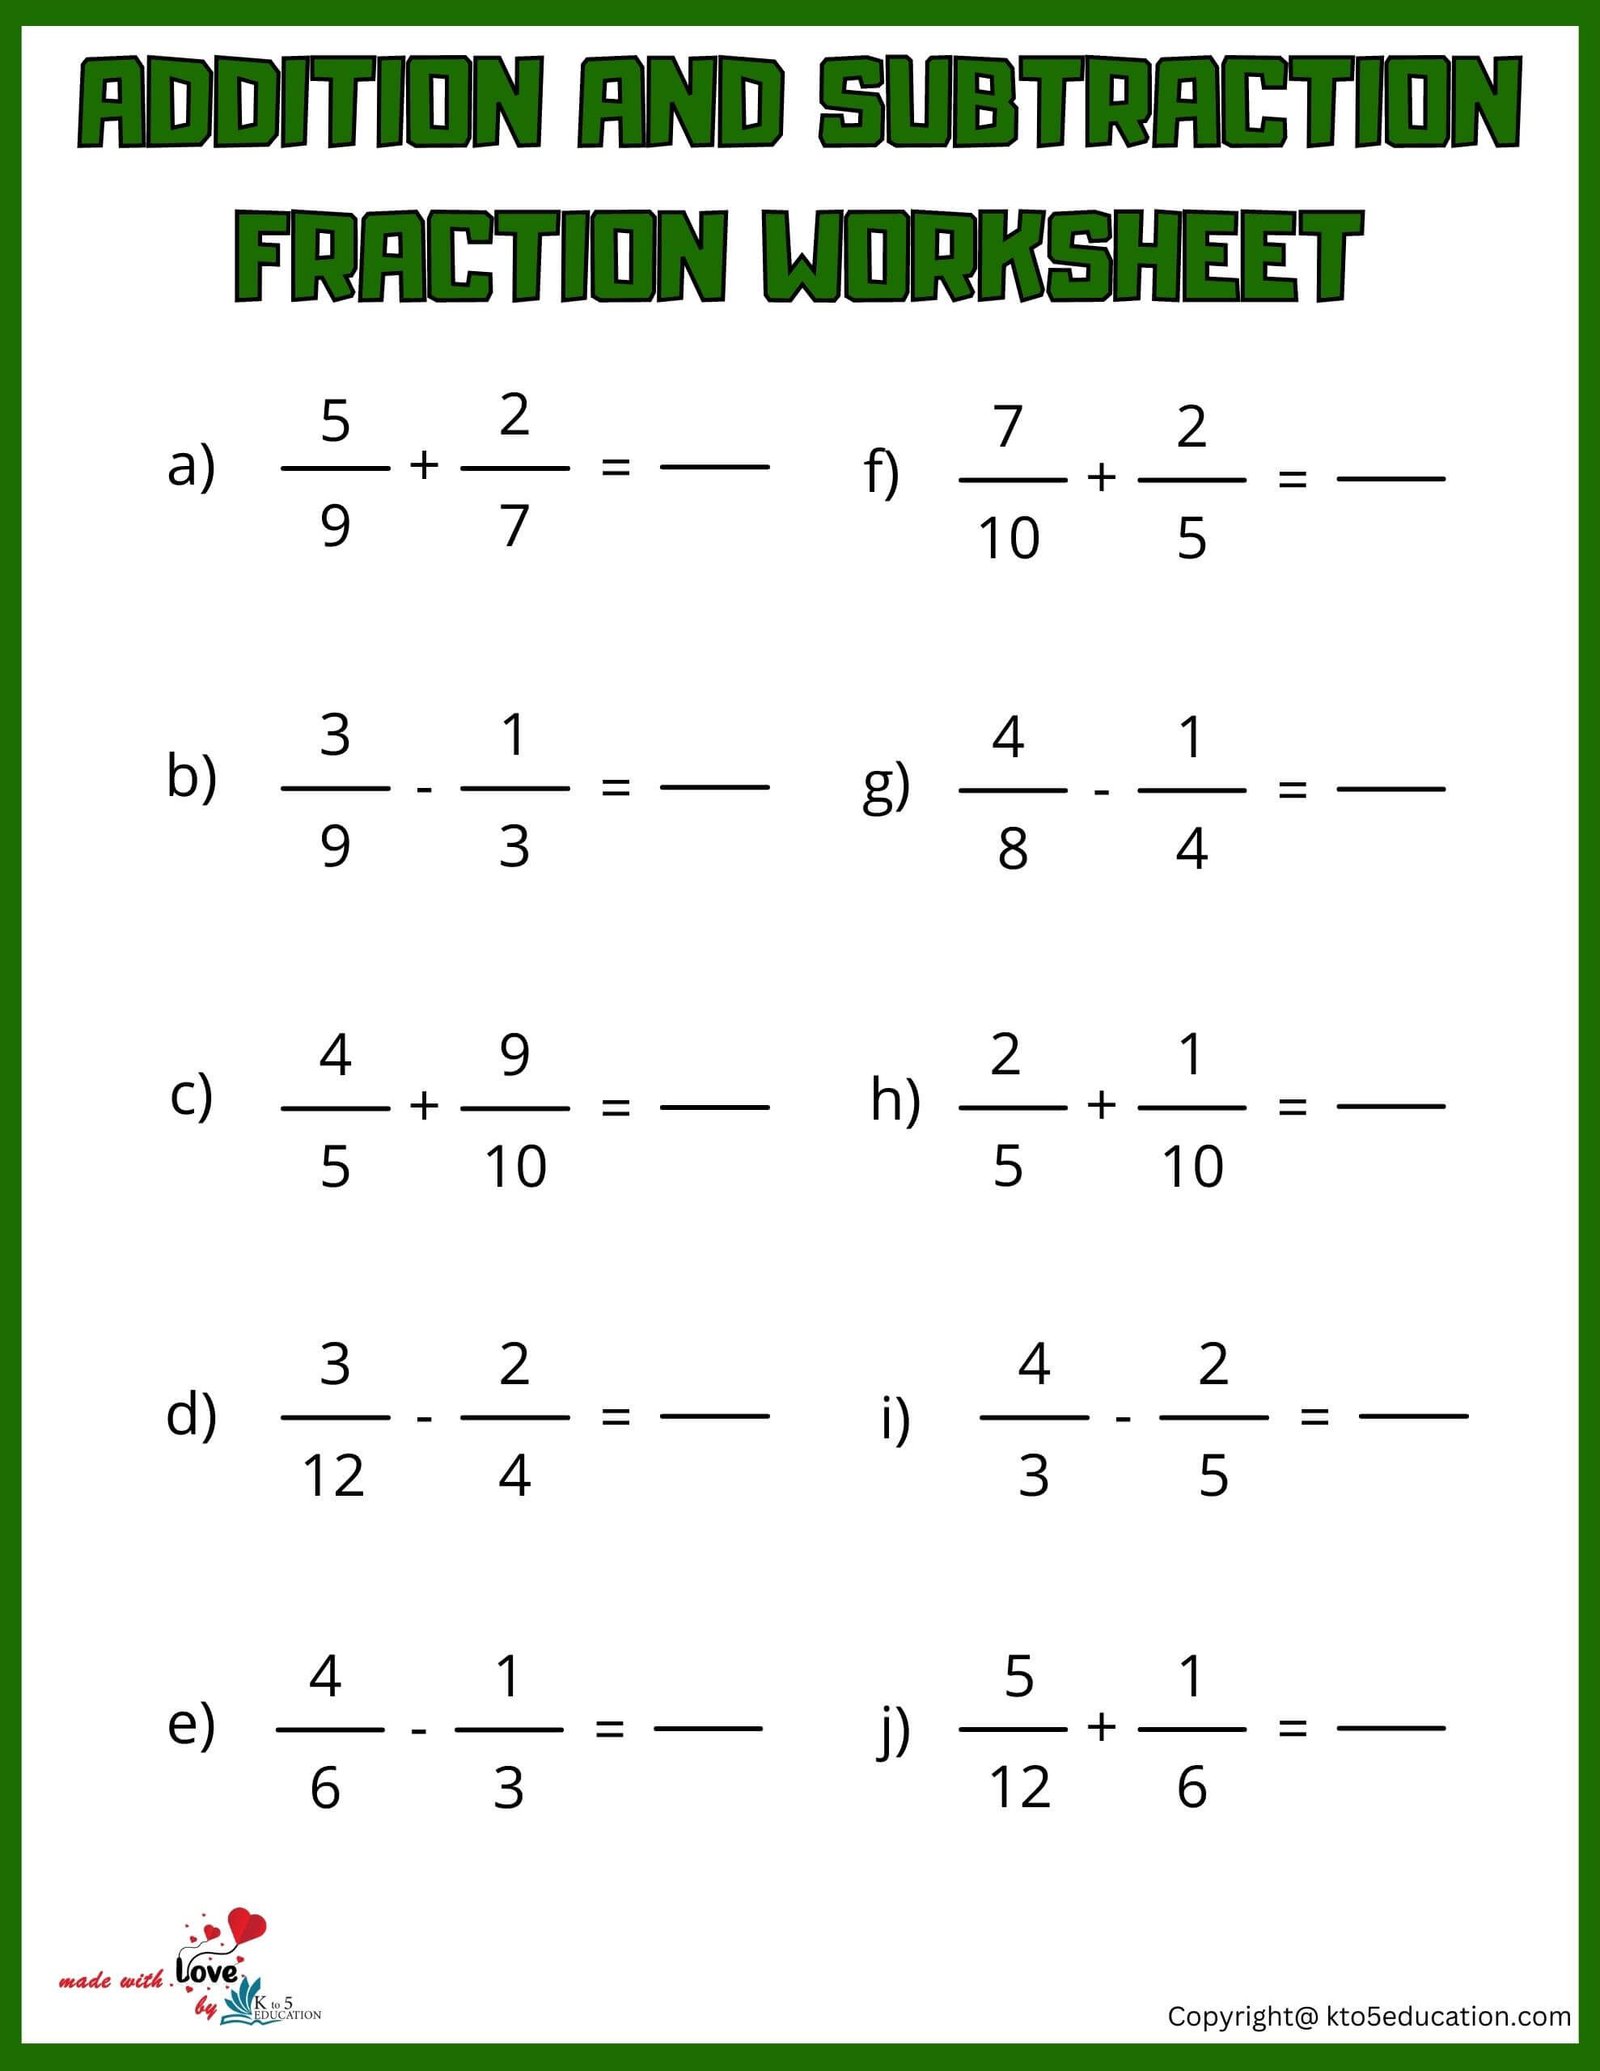 Fifth Grade Addition And Subtraction Fraction Worksheet